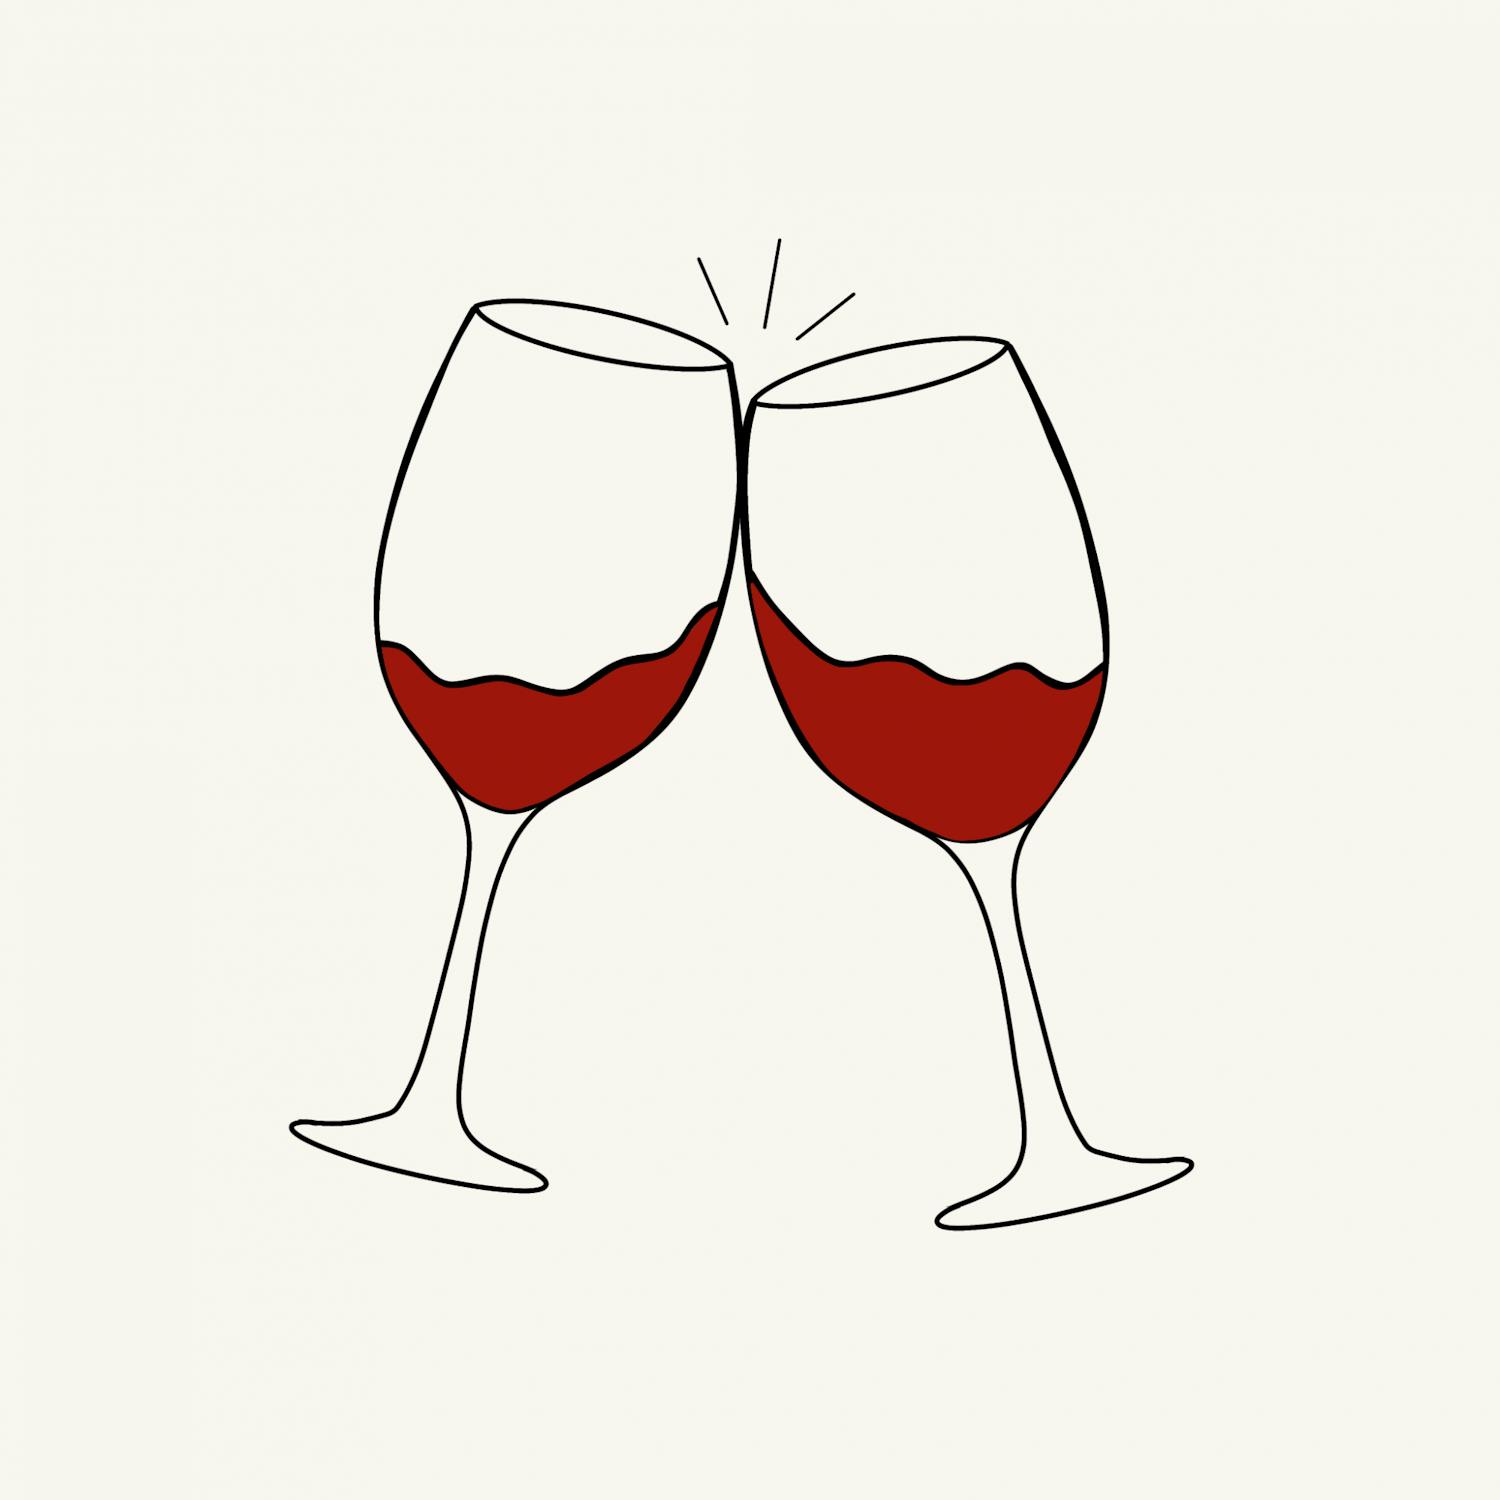 Food and Wine Graphic 